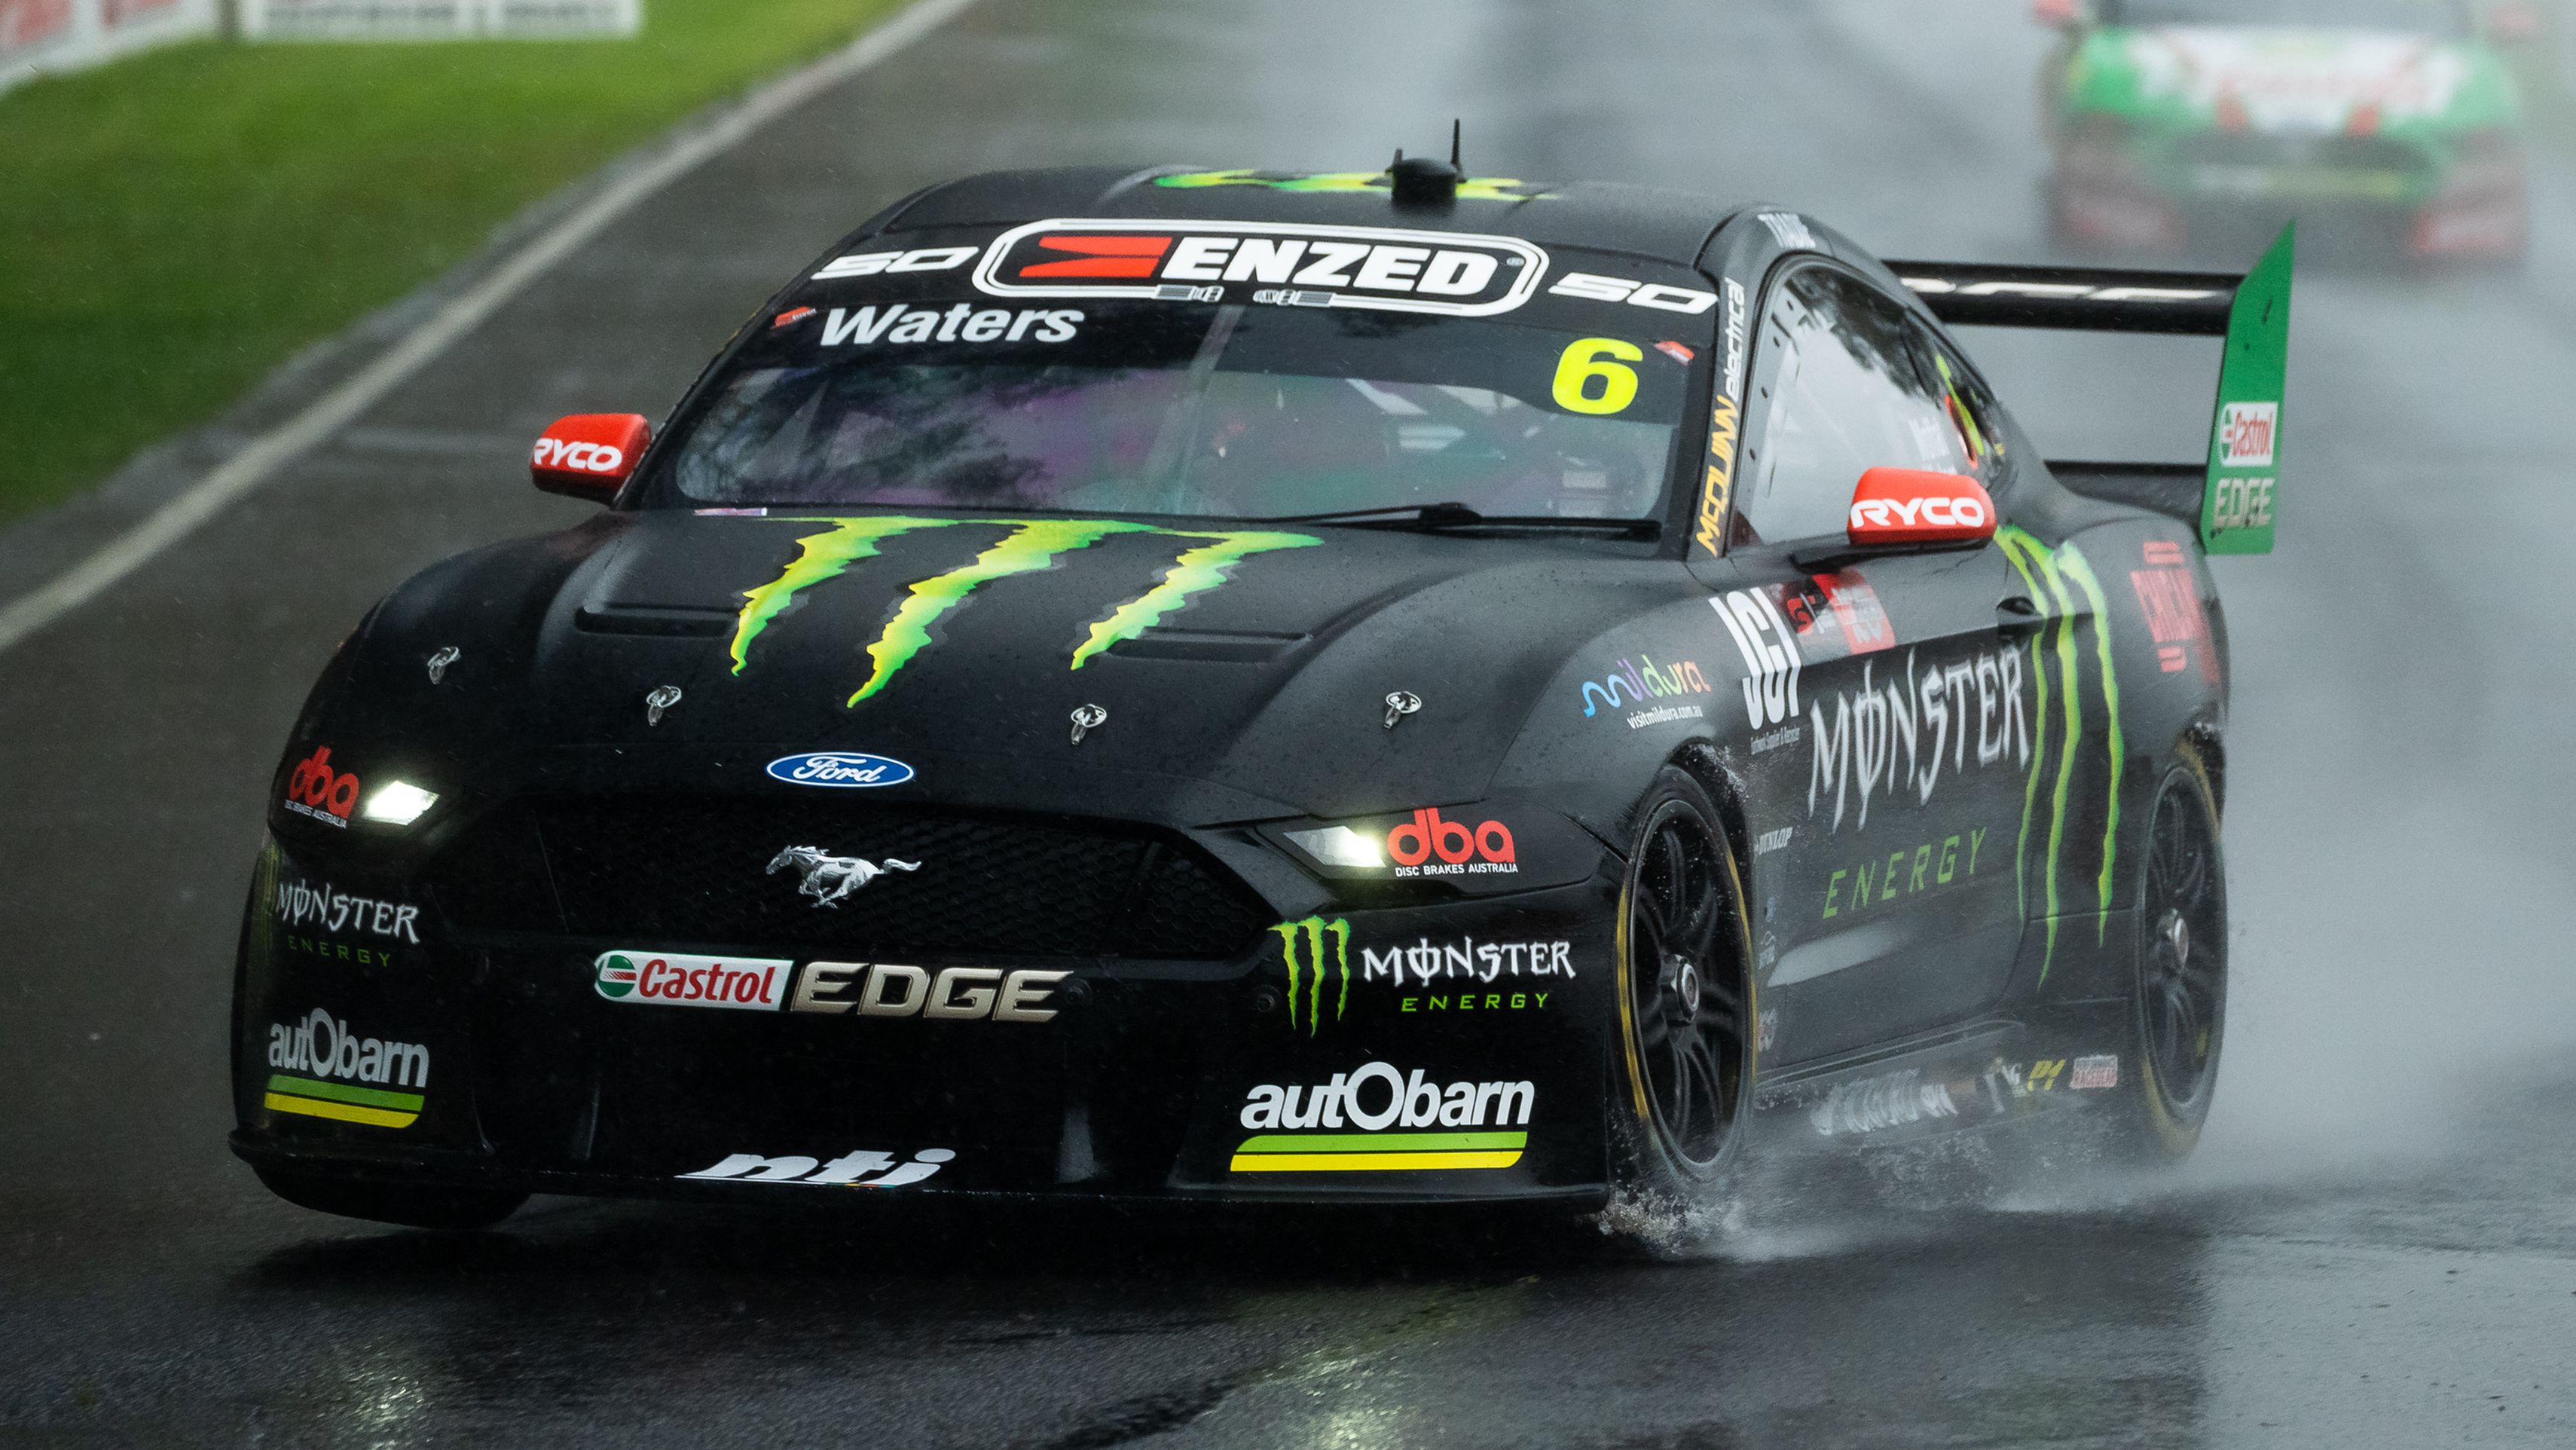 Cameron Waters driver of the #6 Monster Energy Racing Ford Mustang during qualifying for the Bathurst 1000, which is race 30 of 2022 Supercars Championship Season at Mount Panorama on October 07, 2022 in Bathurst, Australia. (Photo by Daniel Kalisz/Getty Images)